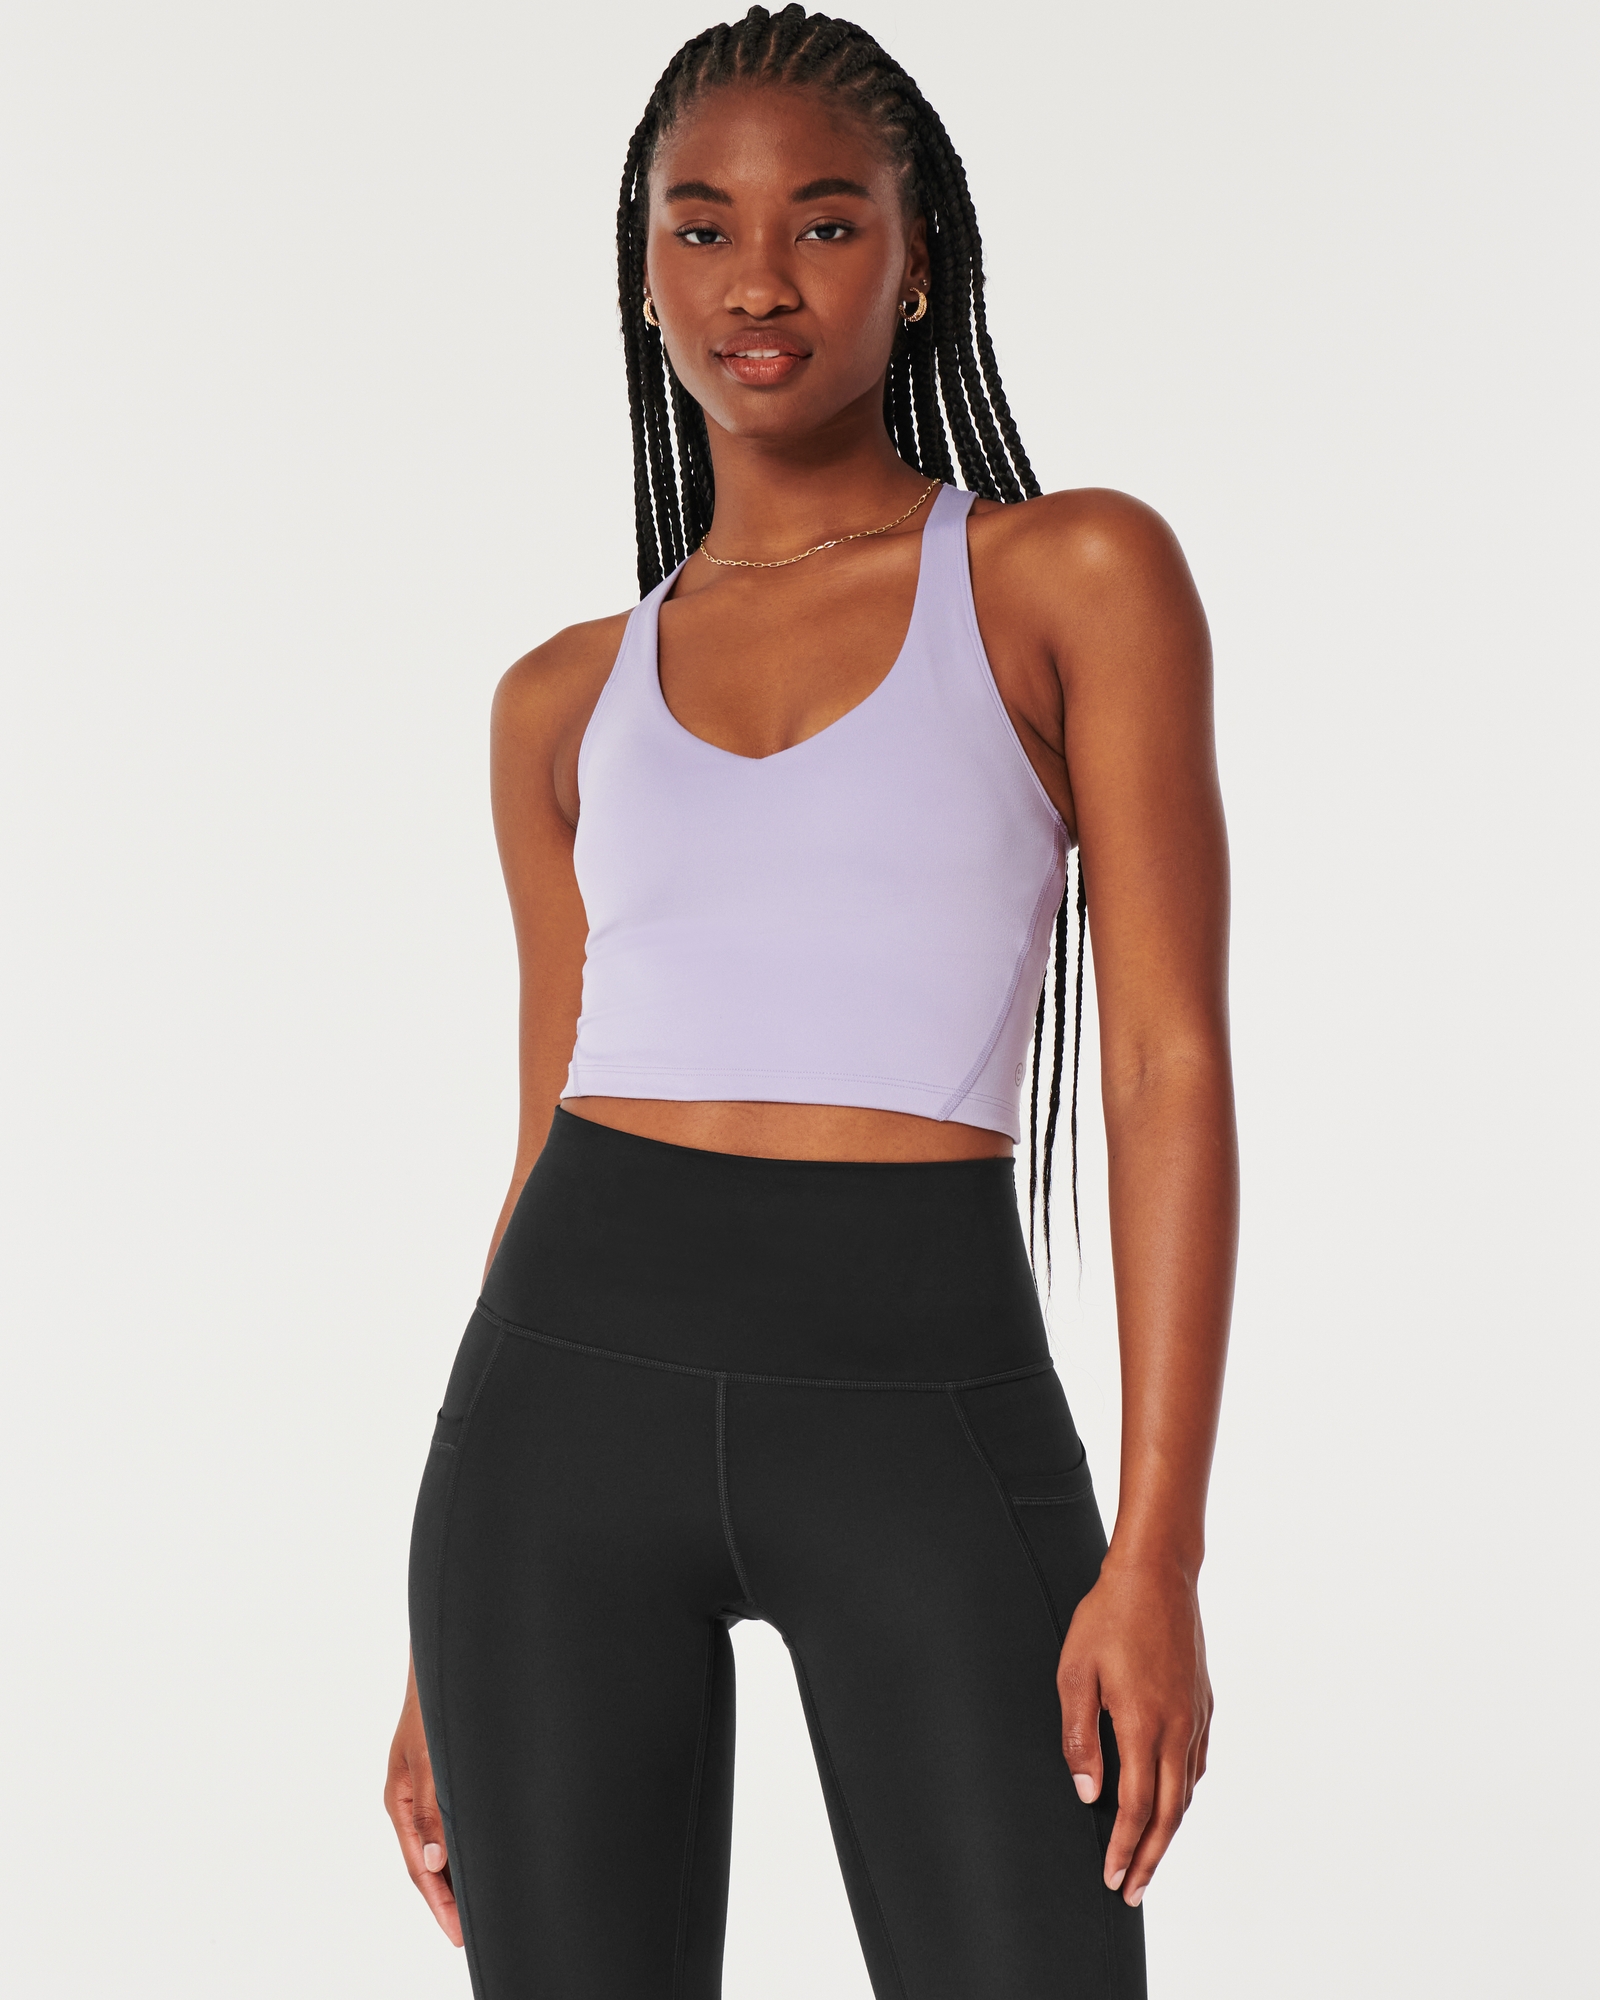 Hollister Gilly Hicks Go Boost Strappy Seamless Longline Sports